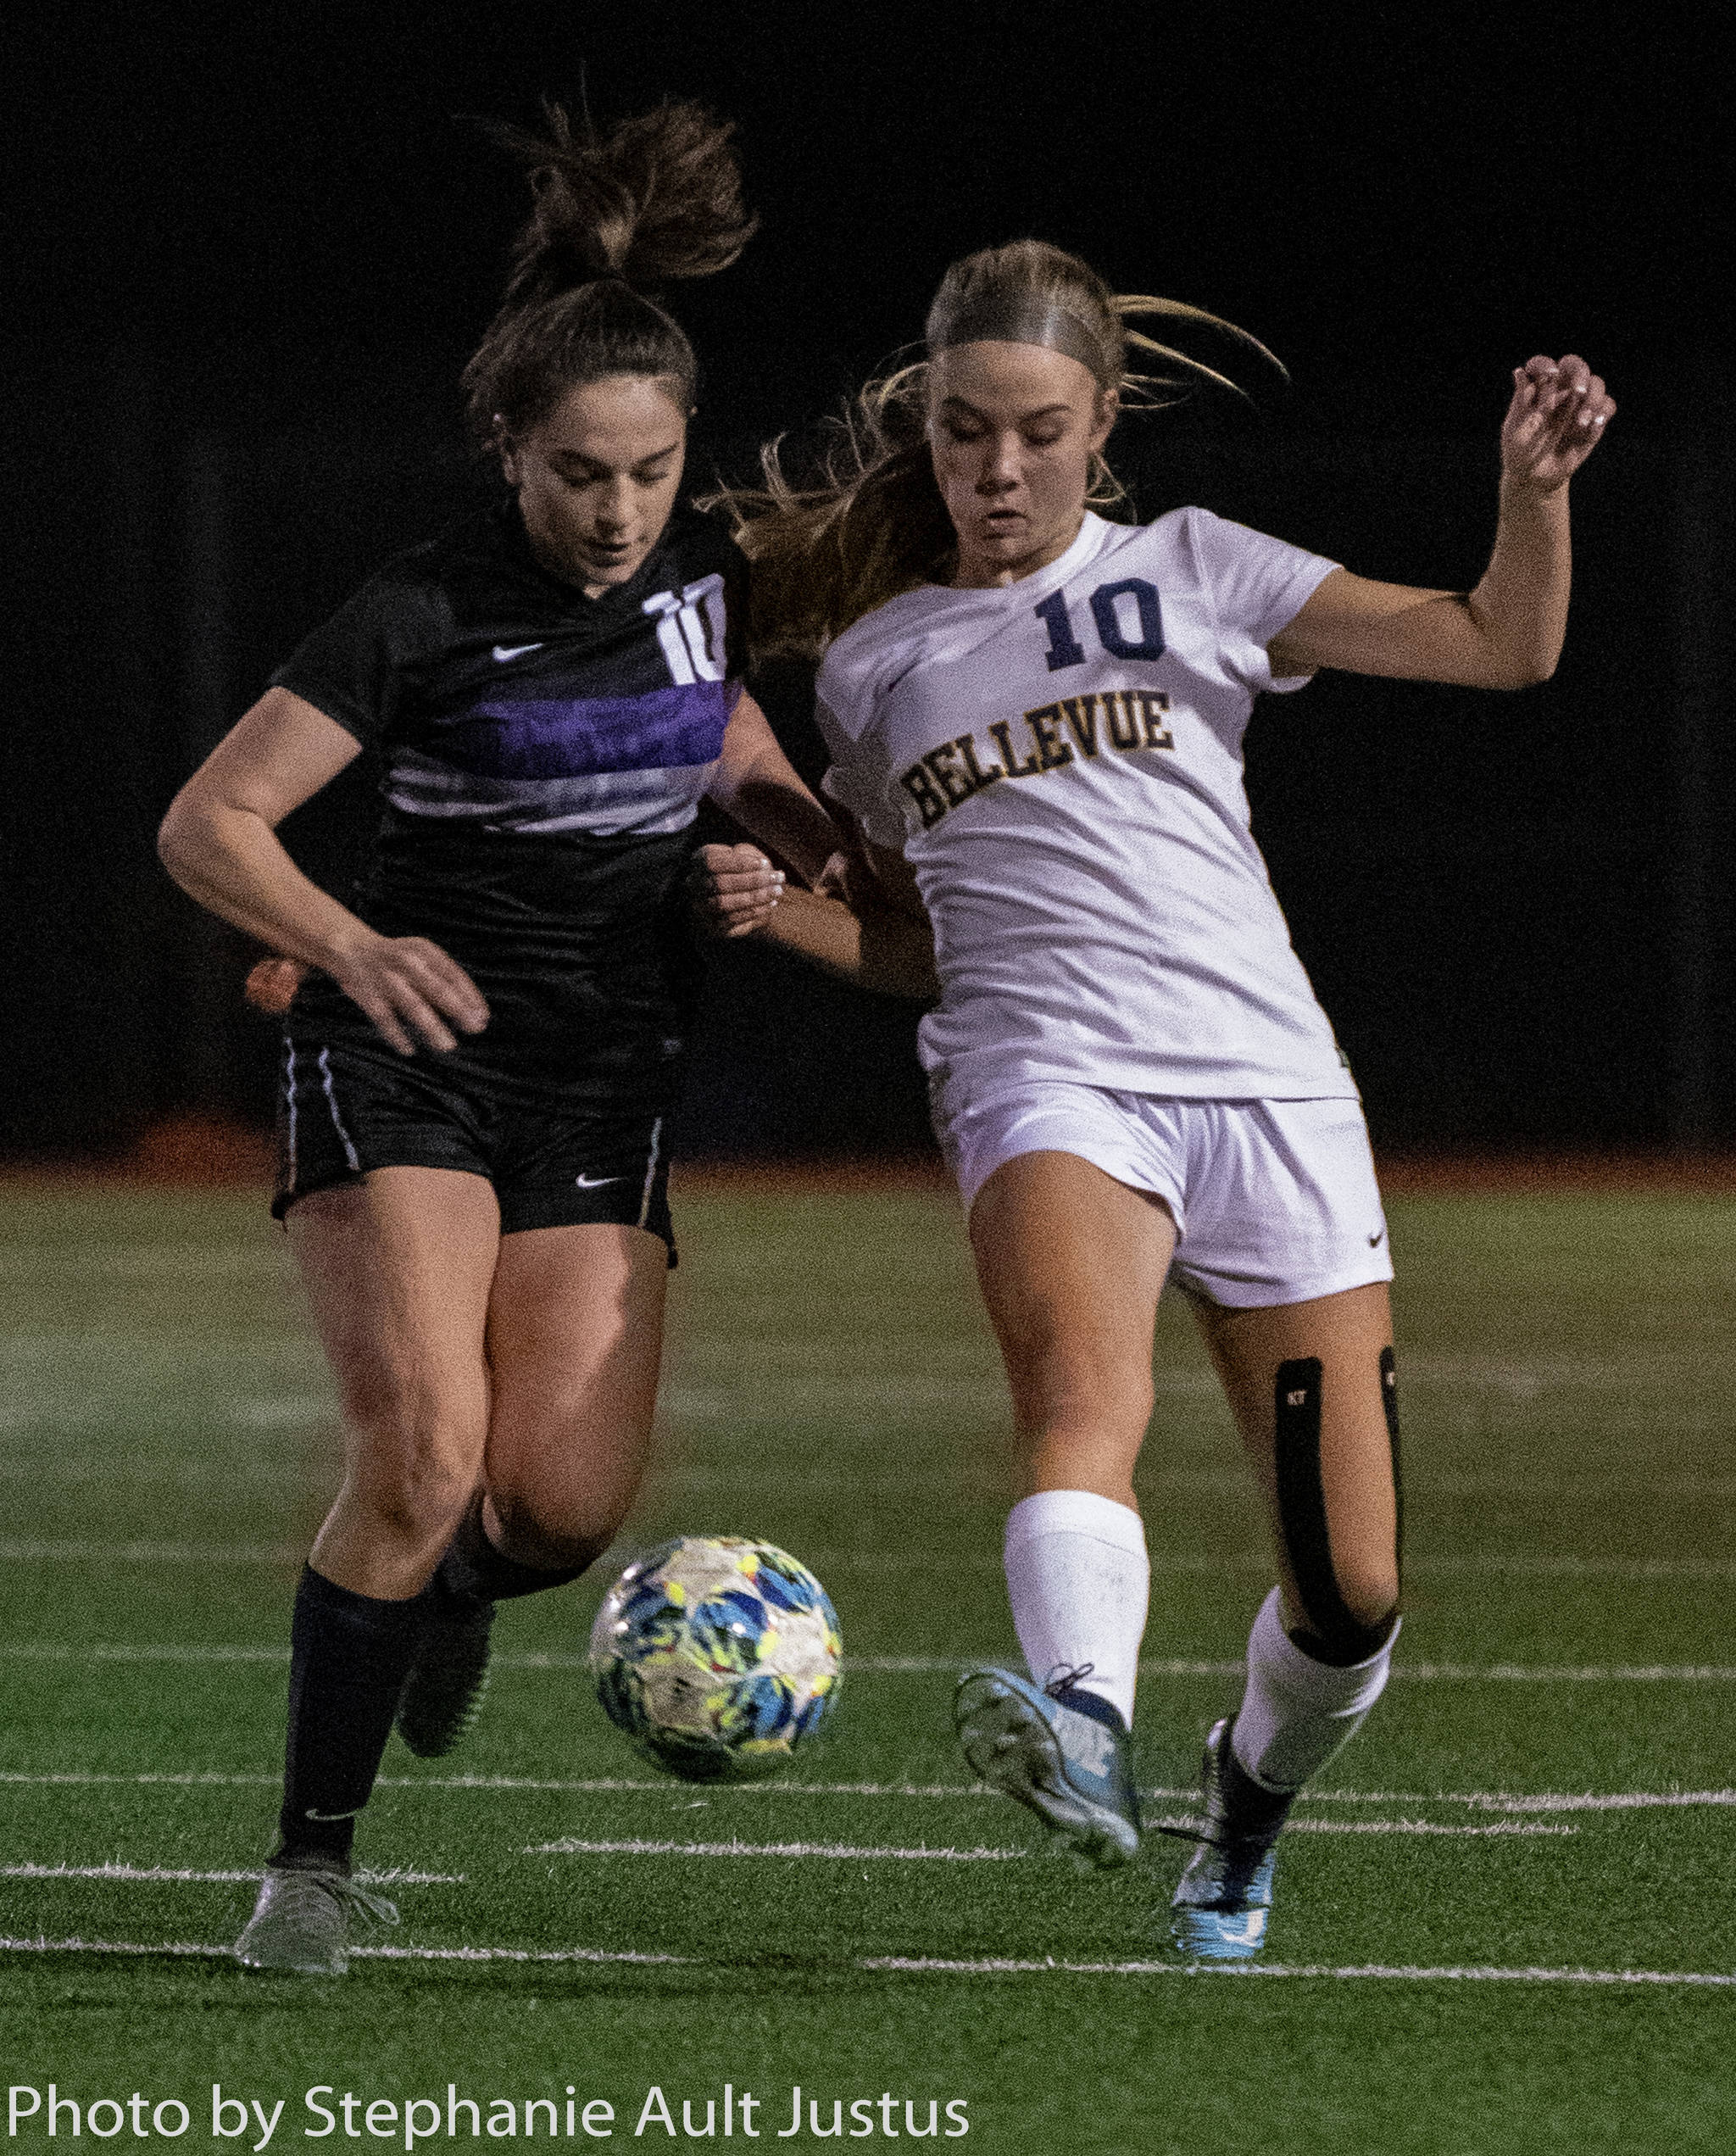 Lake Washington sophomore Abby Nikfard (left) and Bellevue junior Zoe Fowler both go for the ball during the 3A KingCo championship game on Nov. 5. Photo courtesy of Stephanie Ault Justus